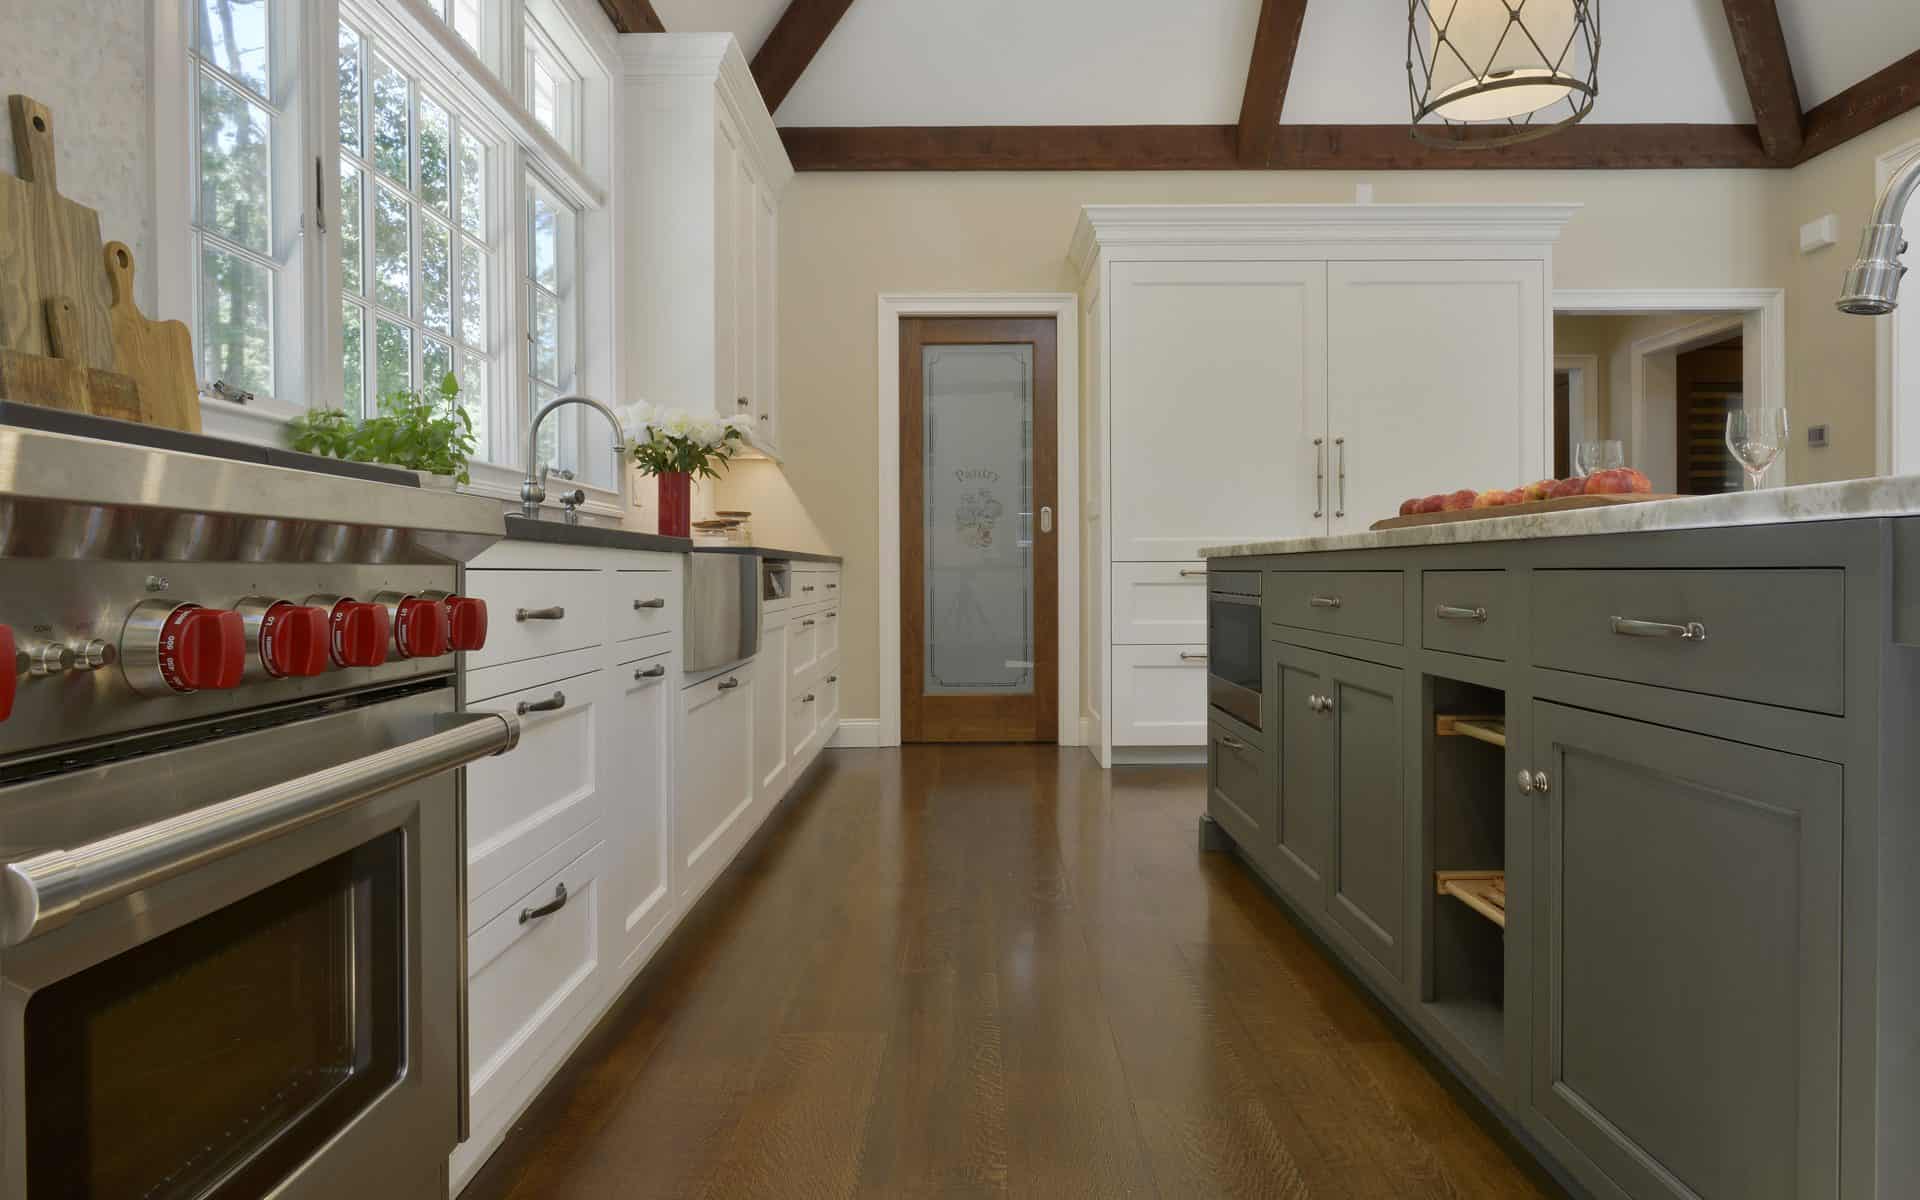 Kitchen features custom island with gray cabinets, dark wood floor and white custom Bilotta cabinetry.